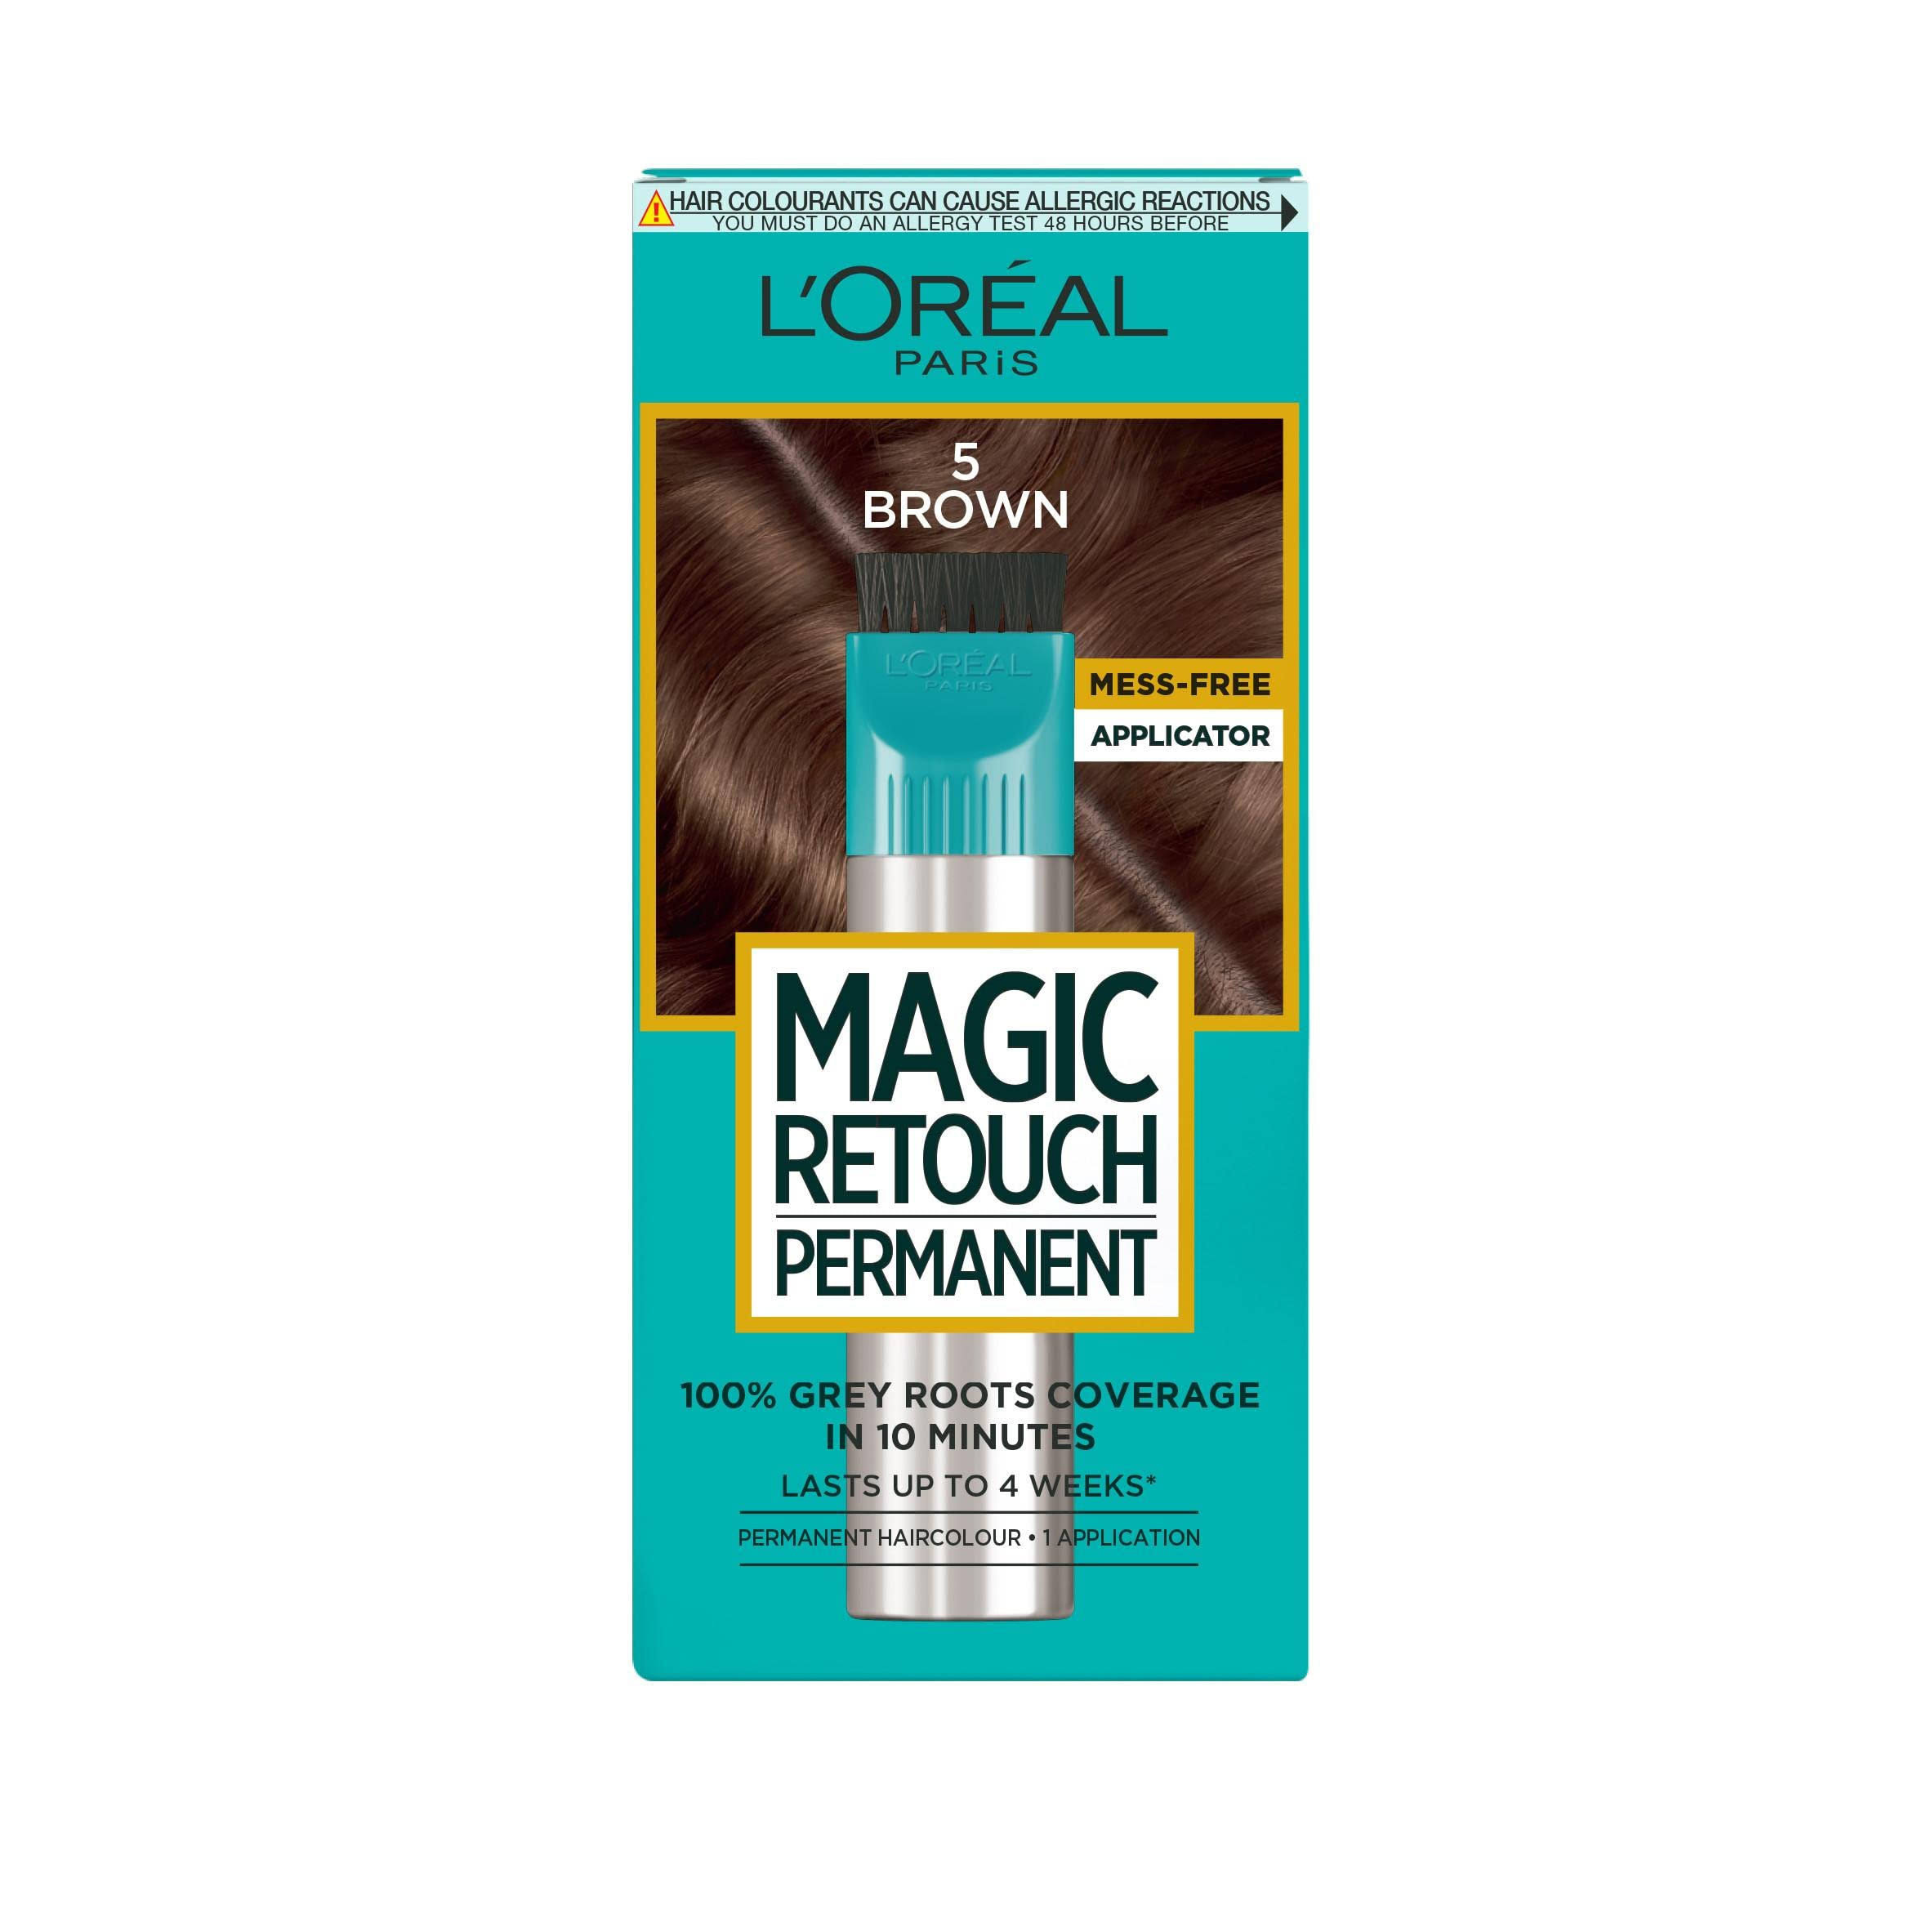 Loreal Magic Retouch Permanent Brown 5 by dpharmacy